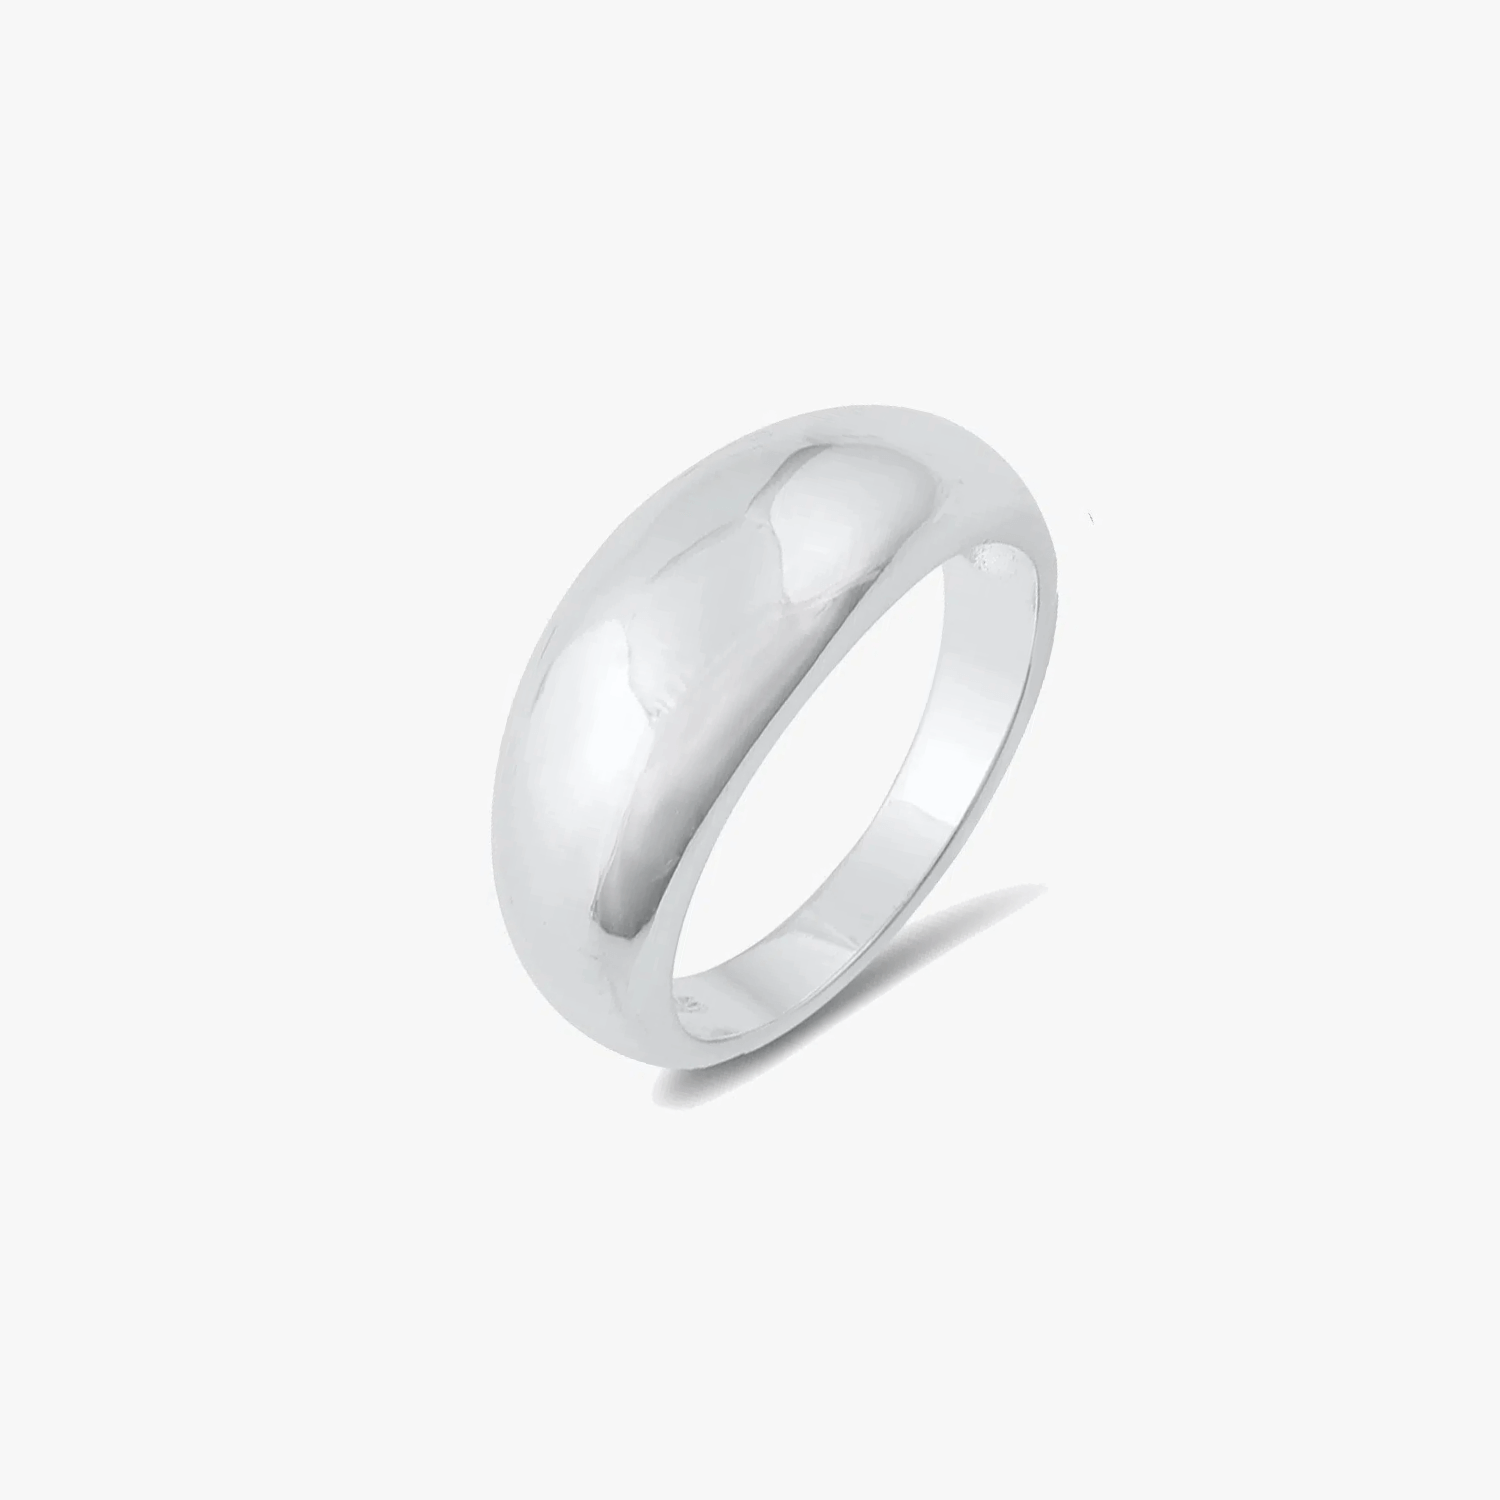 Dome silver ring